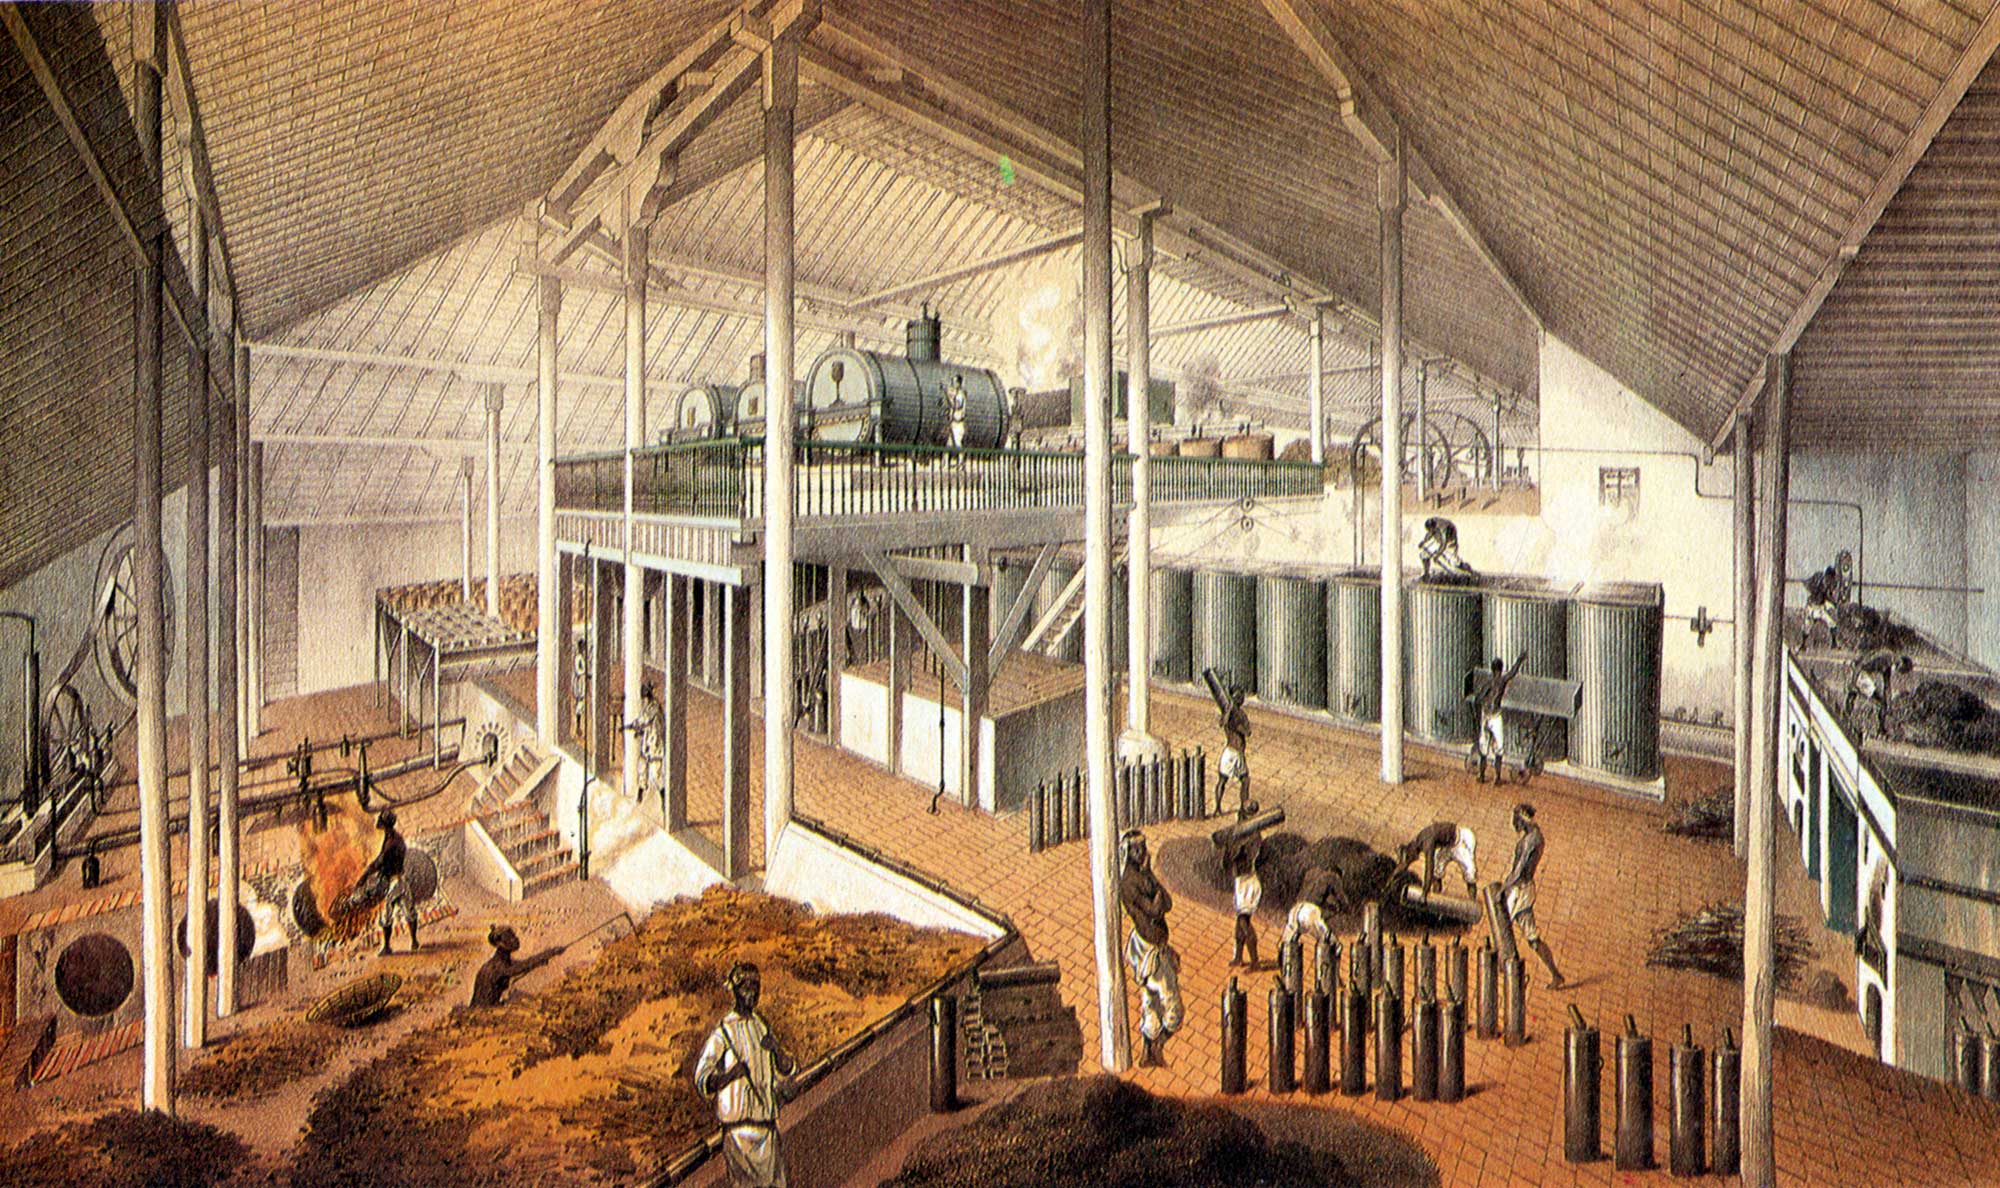 Illustration of a boiling house on Cuba from around 1857. This illustration shows the interior of a building. The building has enclosed boilers and evaporators for processing sugar in the background. In the foreground, piles of bagasse can be seen. Enslaved black laborers can be seen at various places in the sugar mill, doing work.